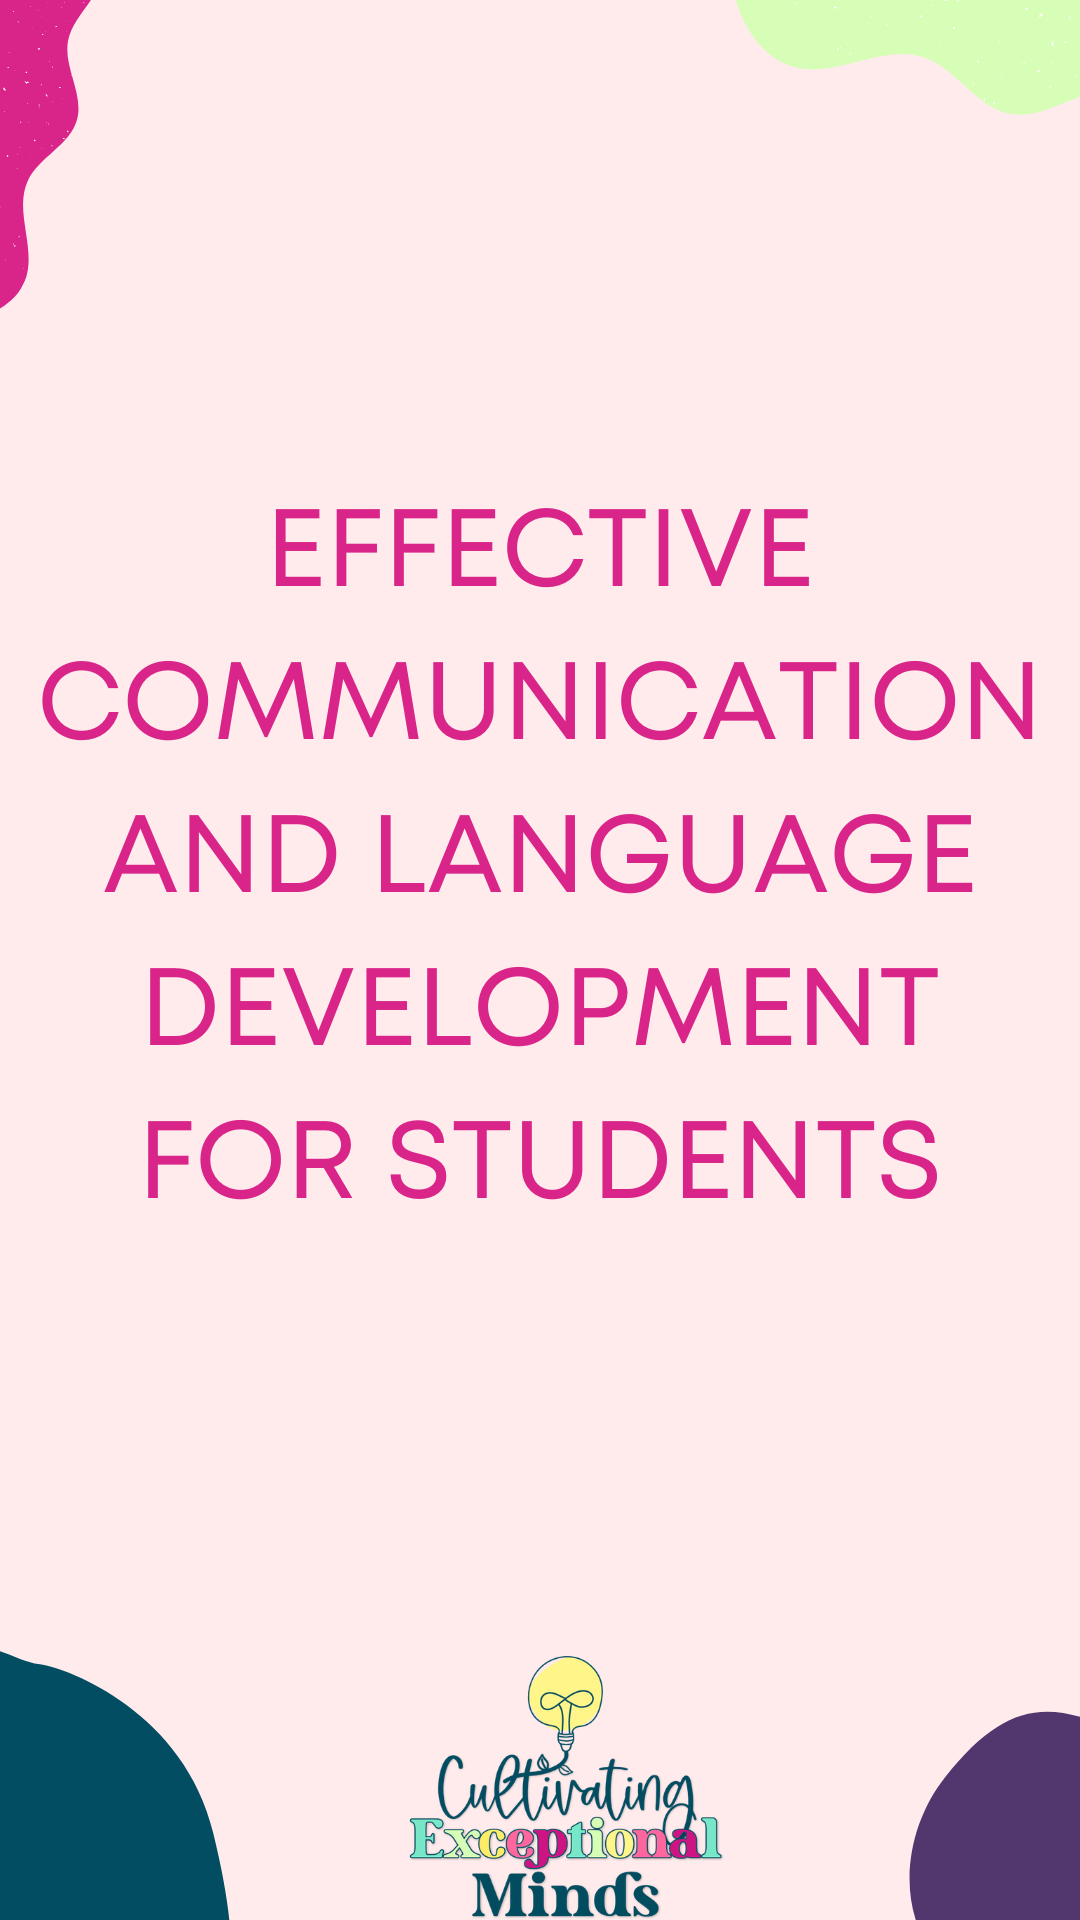 Effective Communication and Language Development for Students